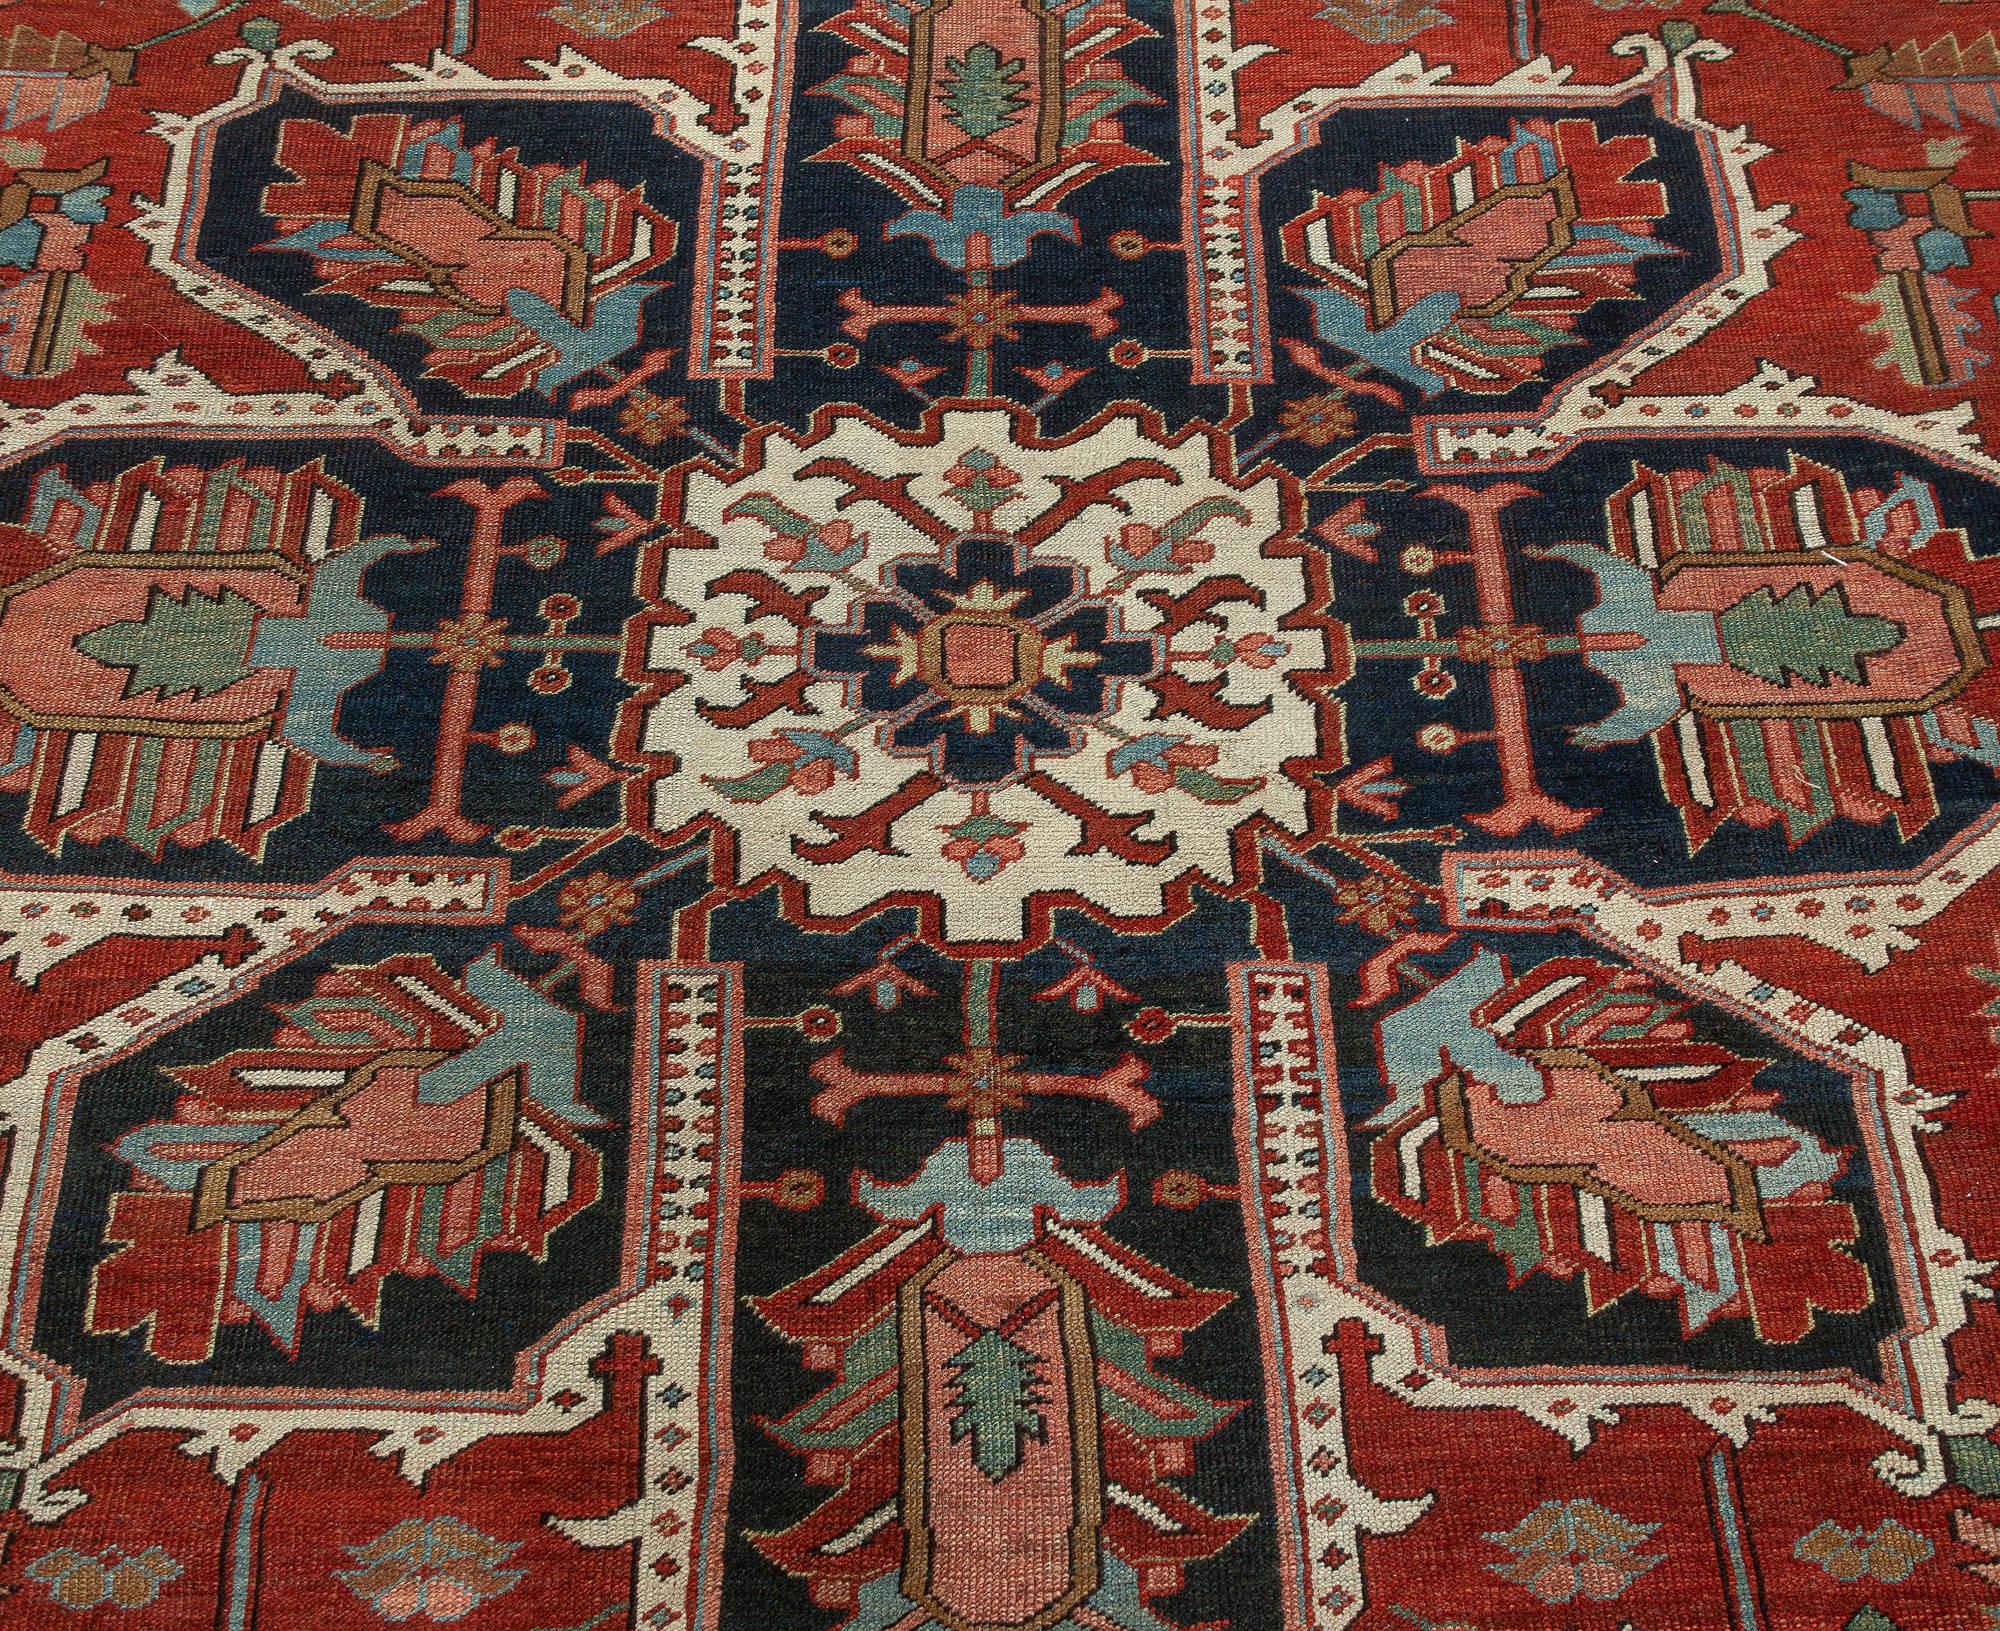 Heriz Serapi One-of-a-kind Antique Persian Heriz Rug in Beige, Blue, Pink, and Red